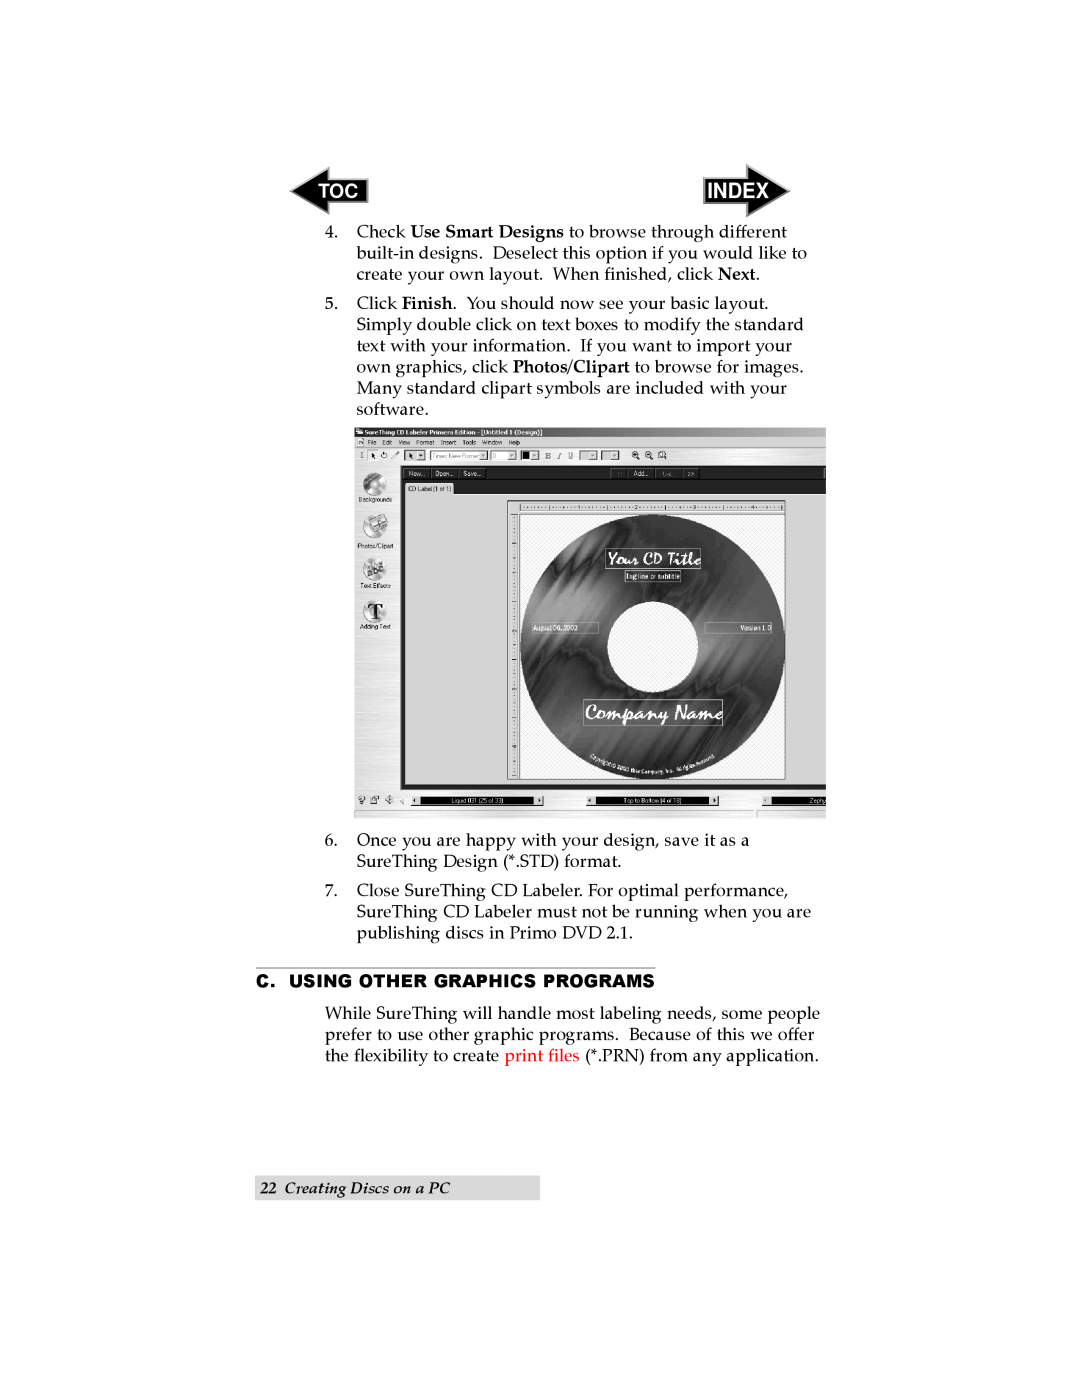 Primera Technology II user manual Index, C.Using Other Graphics Programs, Creating Discs on a PC 